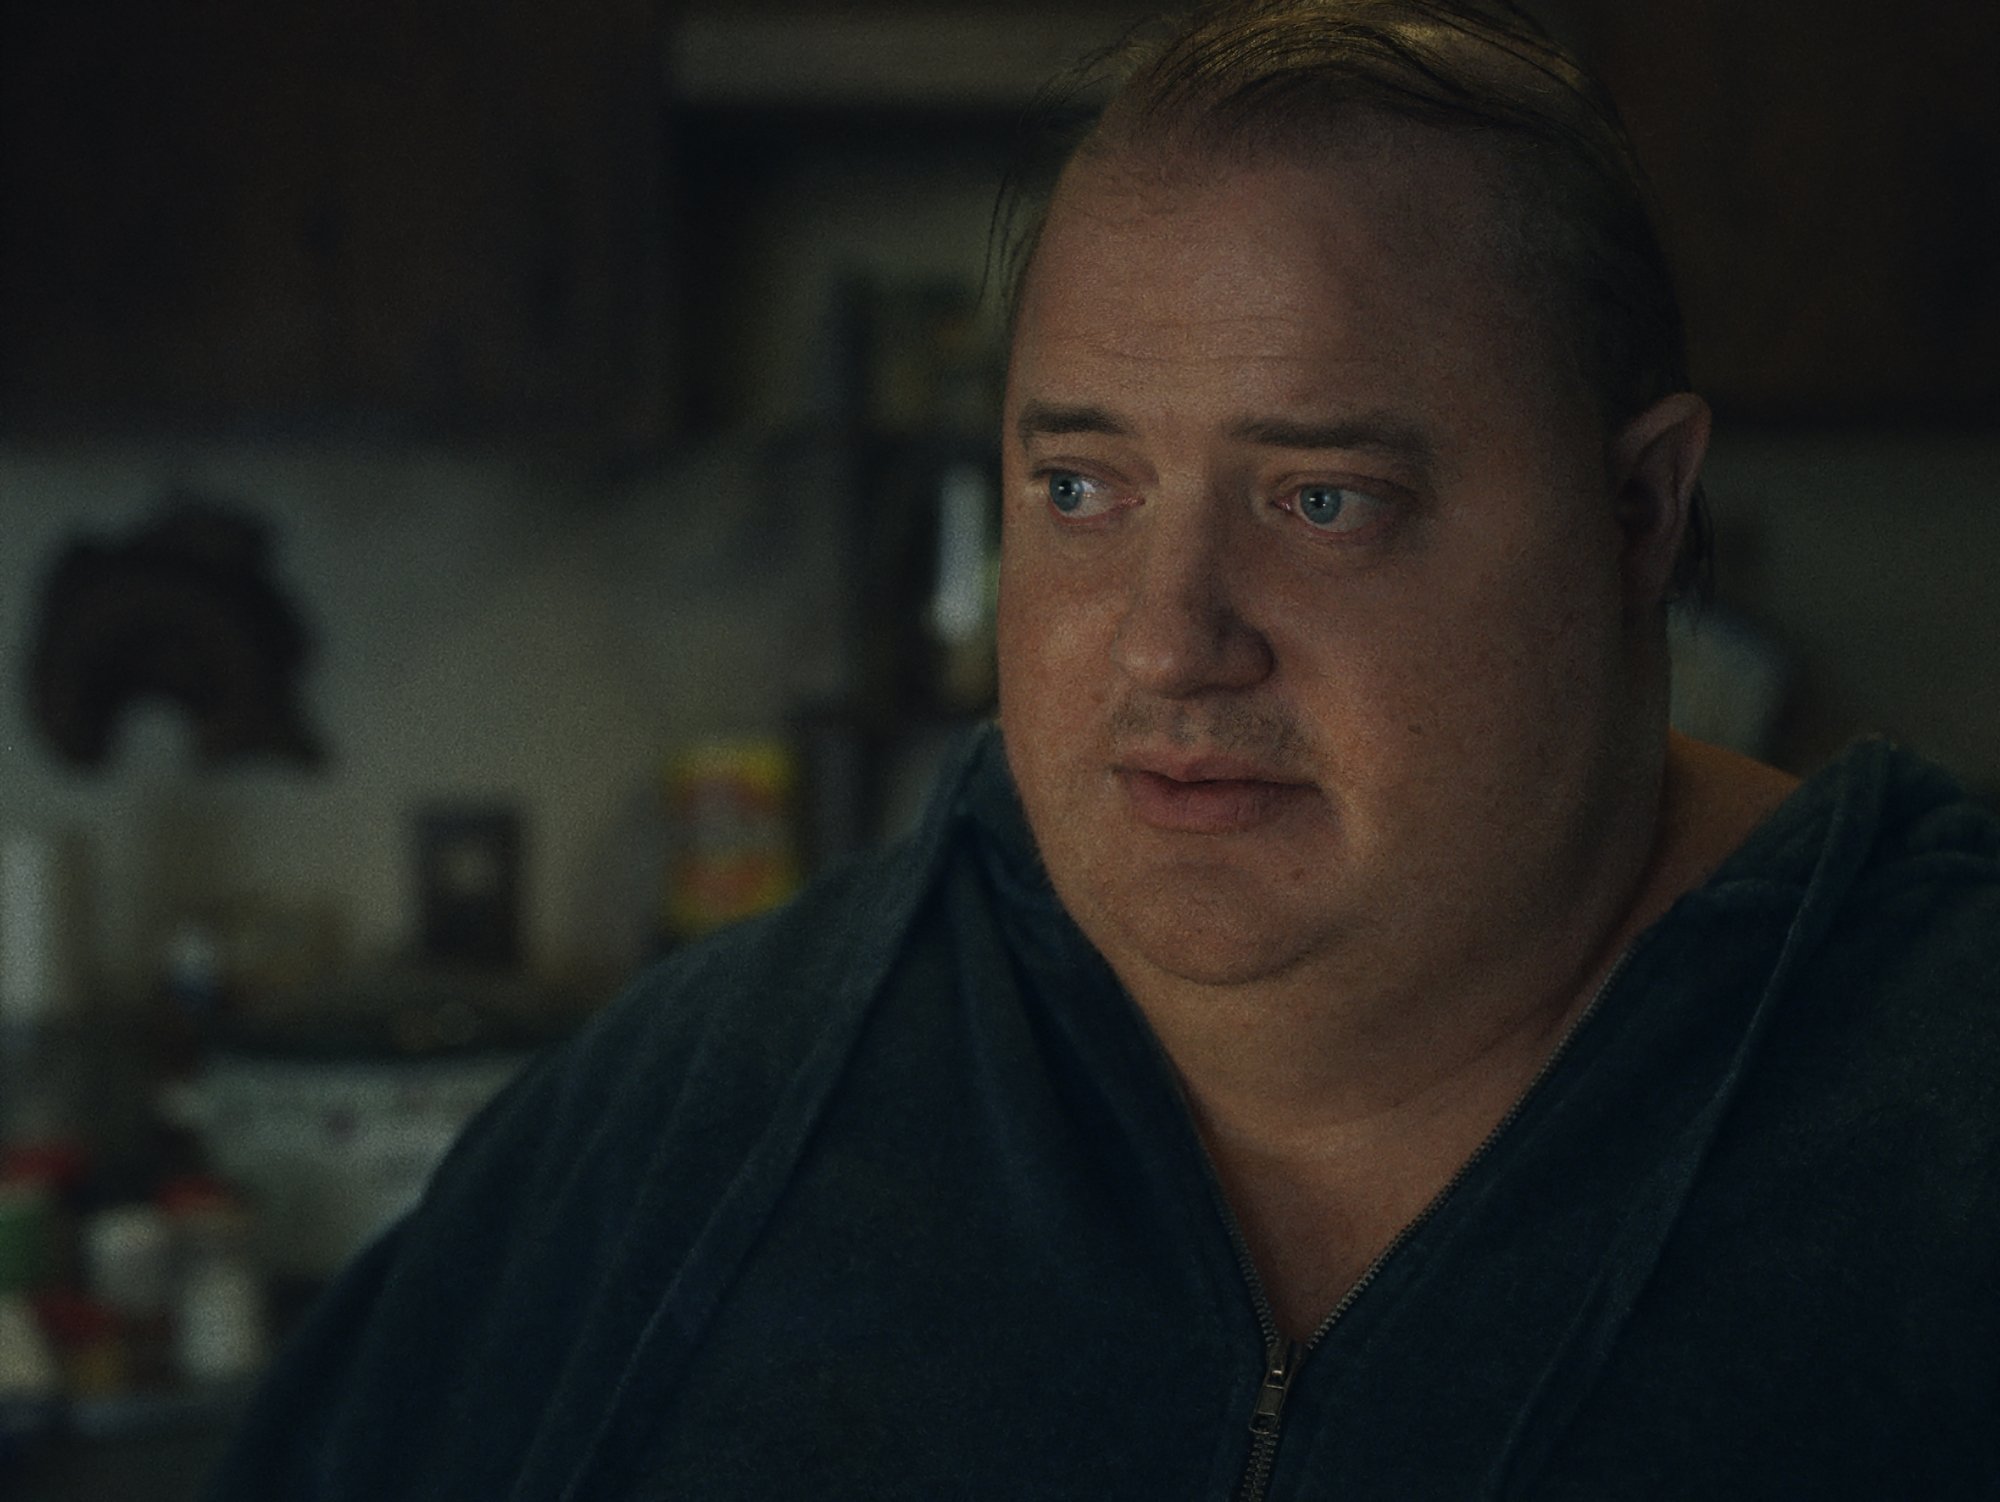 'The Whale' Brendan Fraser as Charlie looking straight ahead with bottles blurred out in the background